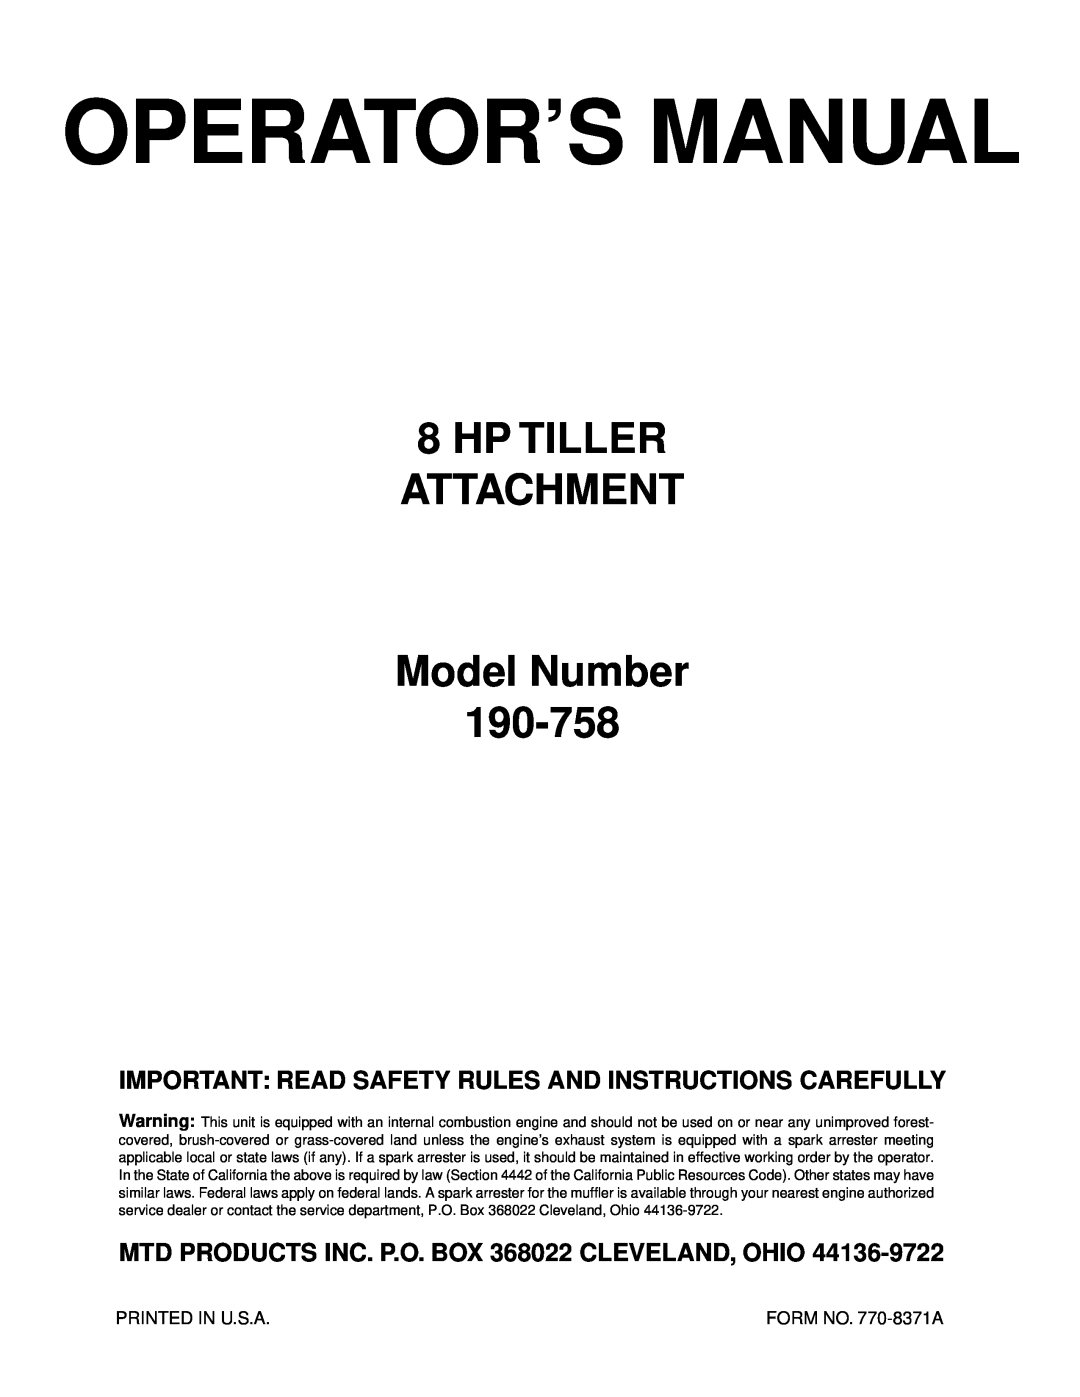 Bolens manual Model Number 190-758, Important Read Safety Rules And Instructions Carefully, Operator’S Manual 